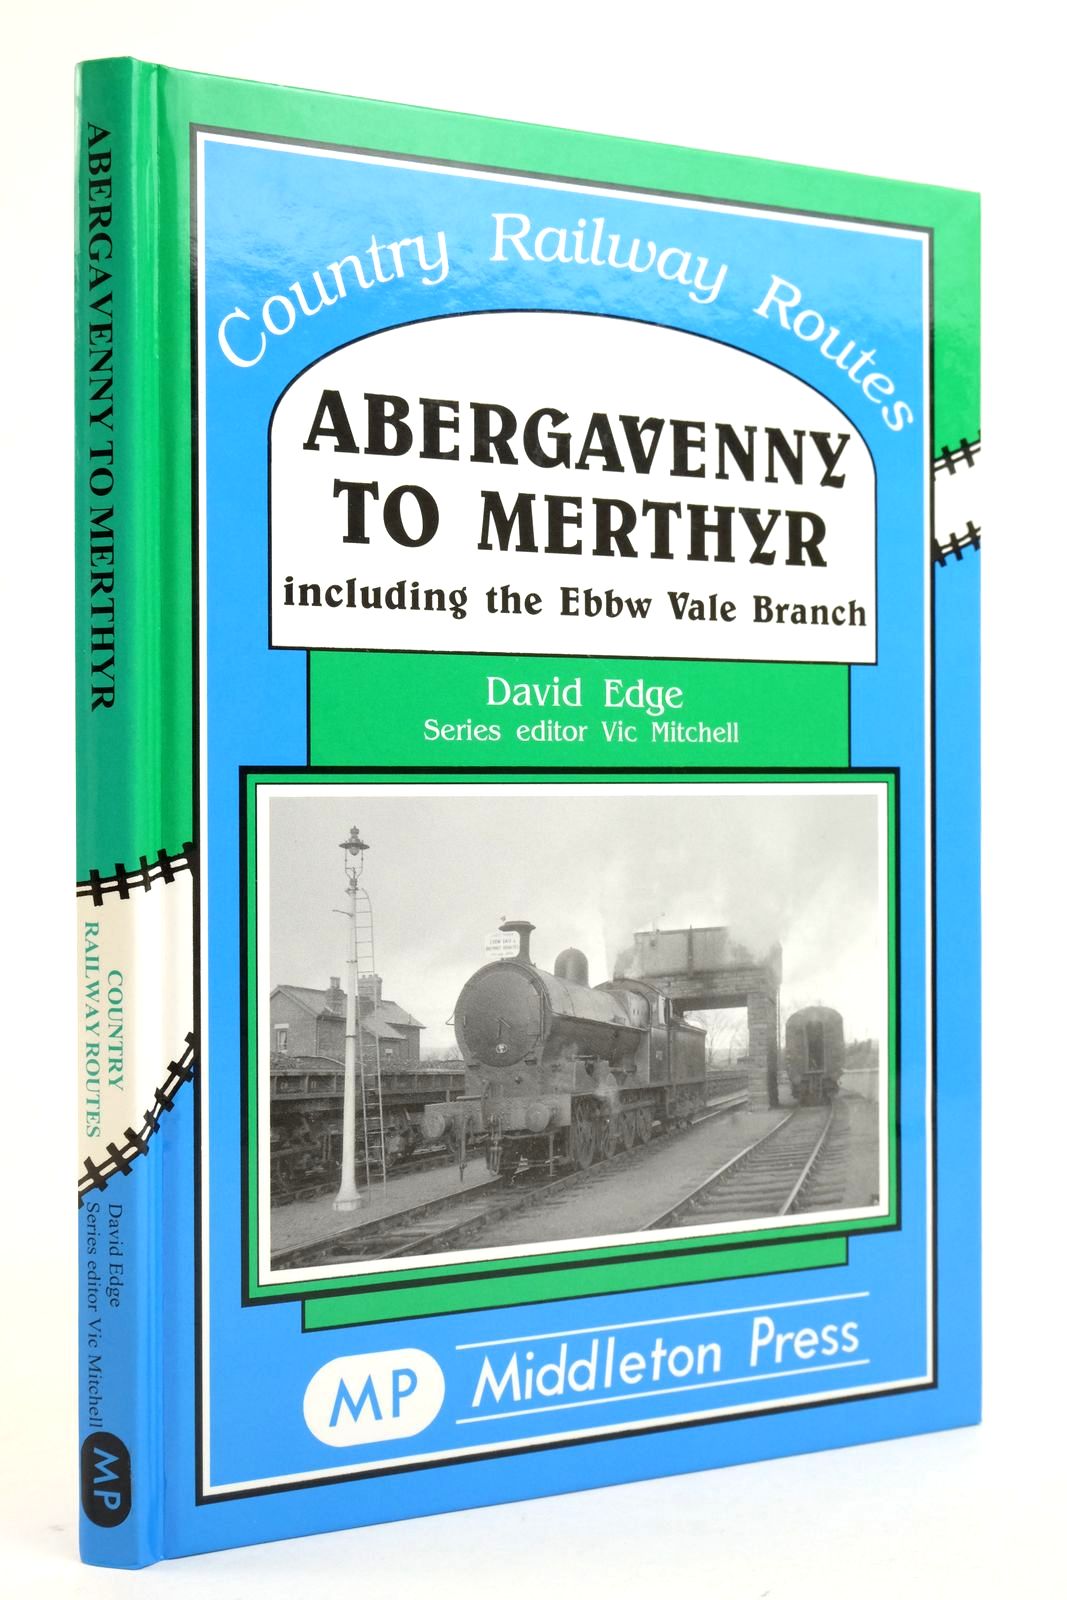 Photo of ABERGAVENNY TO MERTHYR INCLUDING THE EBBW VALE BRANCH (COUNTRY RAILWAY ROUTES) written by Edge, Dave
Mitchell, Vic published by Middleton Press (STOCK CODE: 2136735)  for sale by Stella & Rose's Books